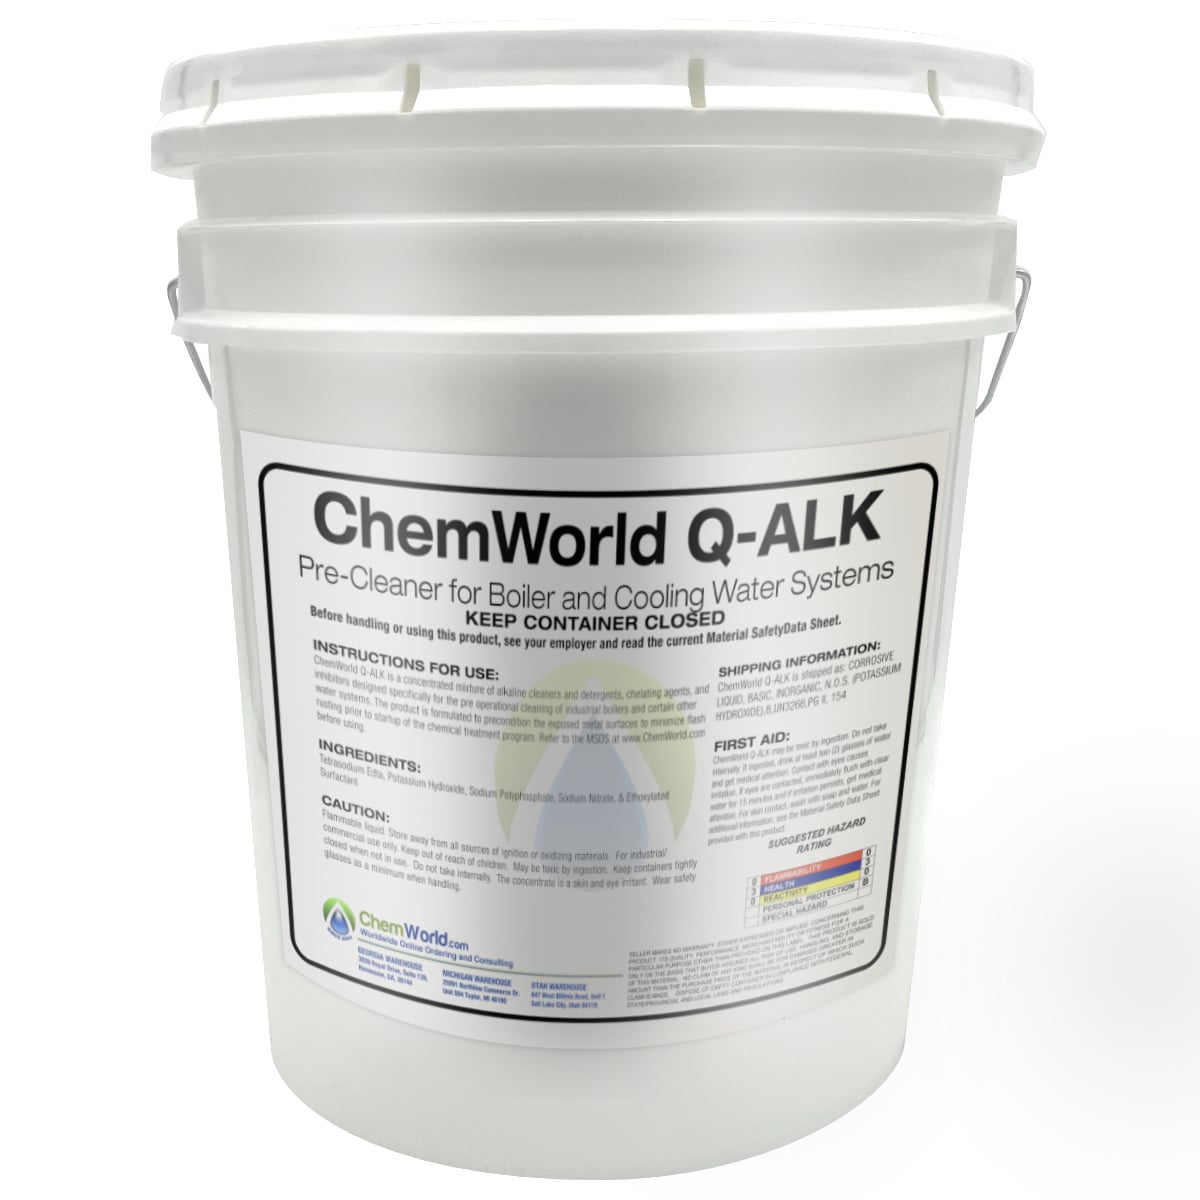 ChemWorld Q-ALK is a concentrated mixture of alkaline cleaners and detergents, chelating agents, and inhibitors designed specifically for the pre-operational cleaning of industrial boilers and certain other water systems. 